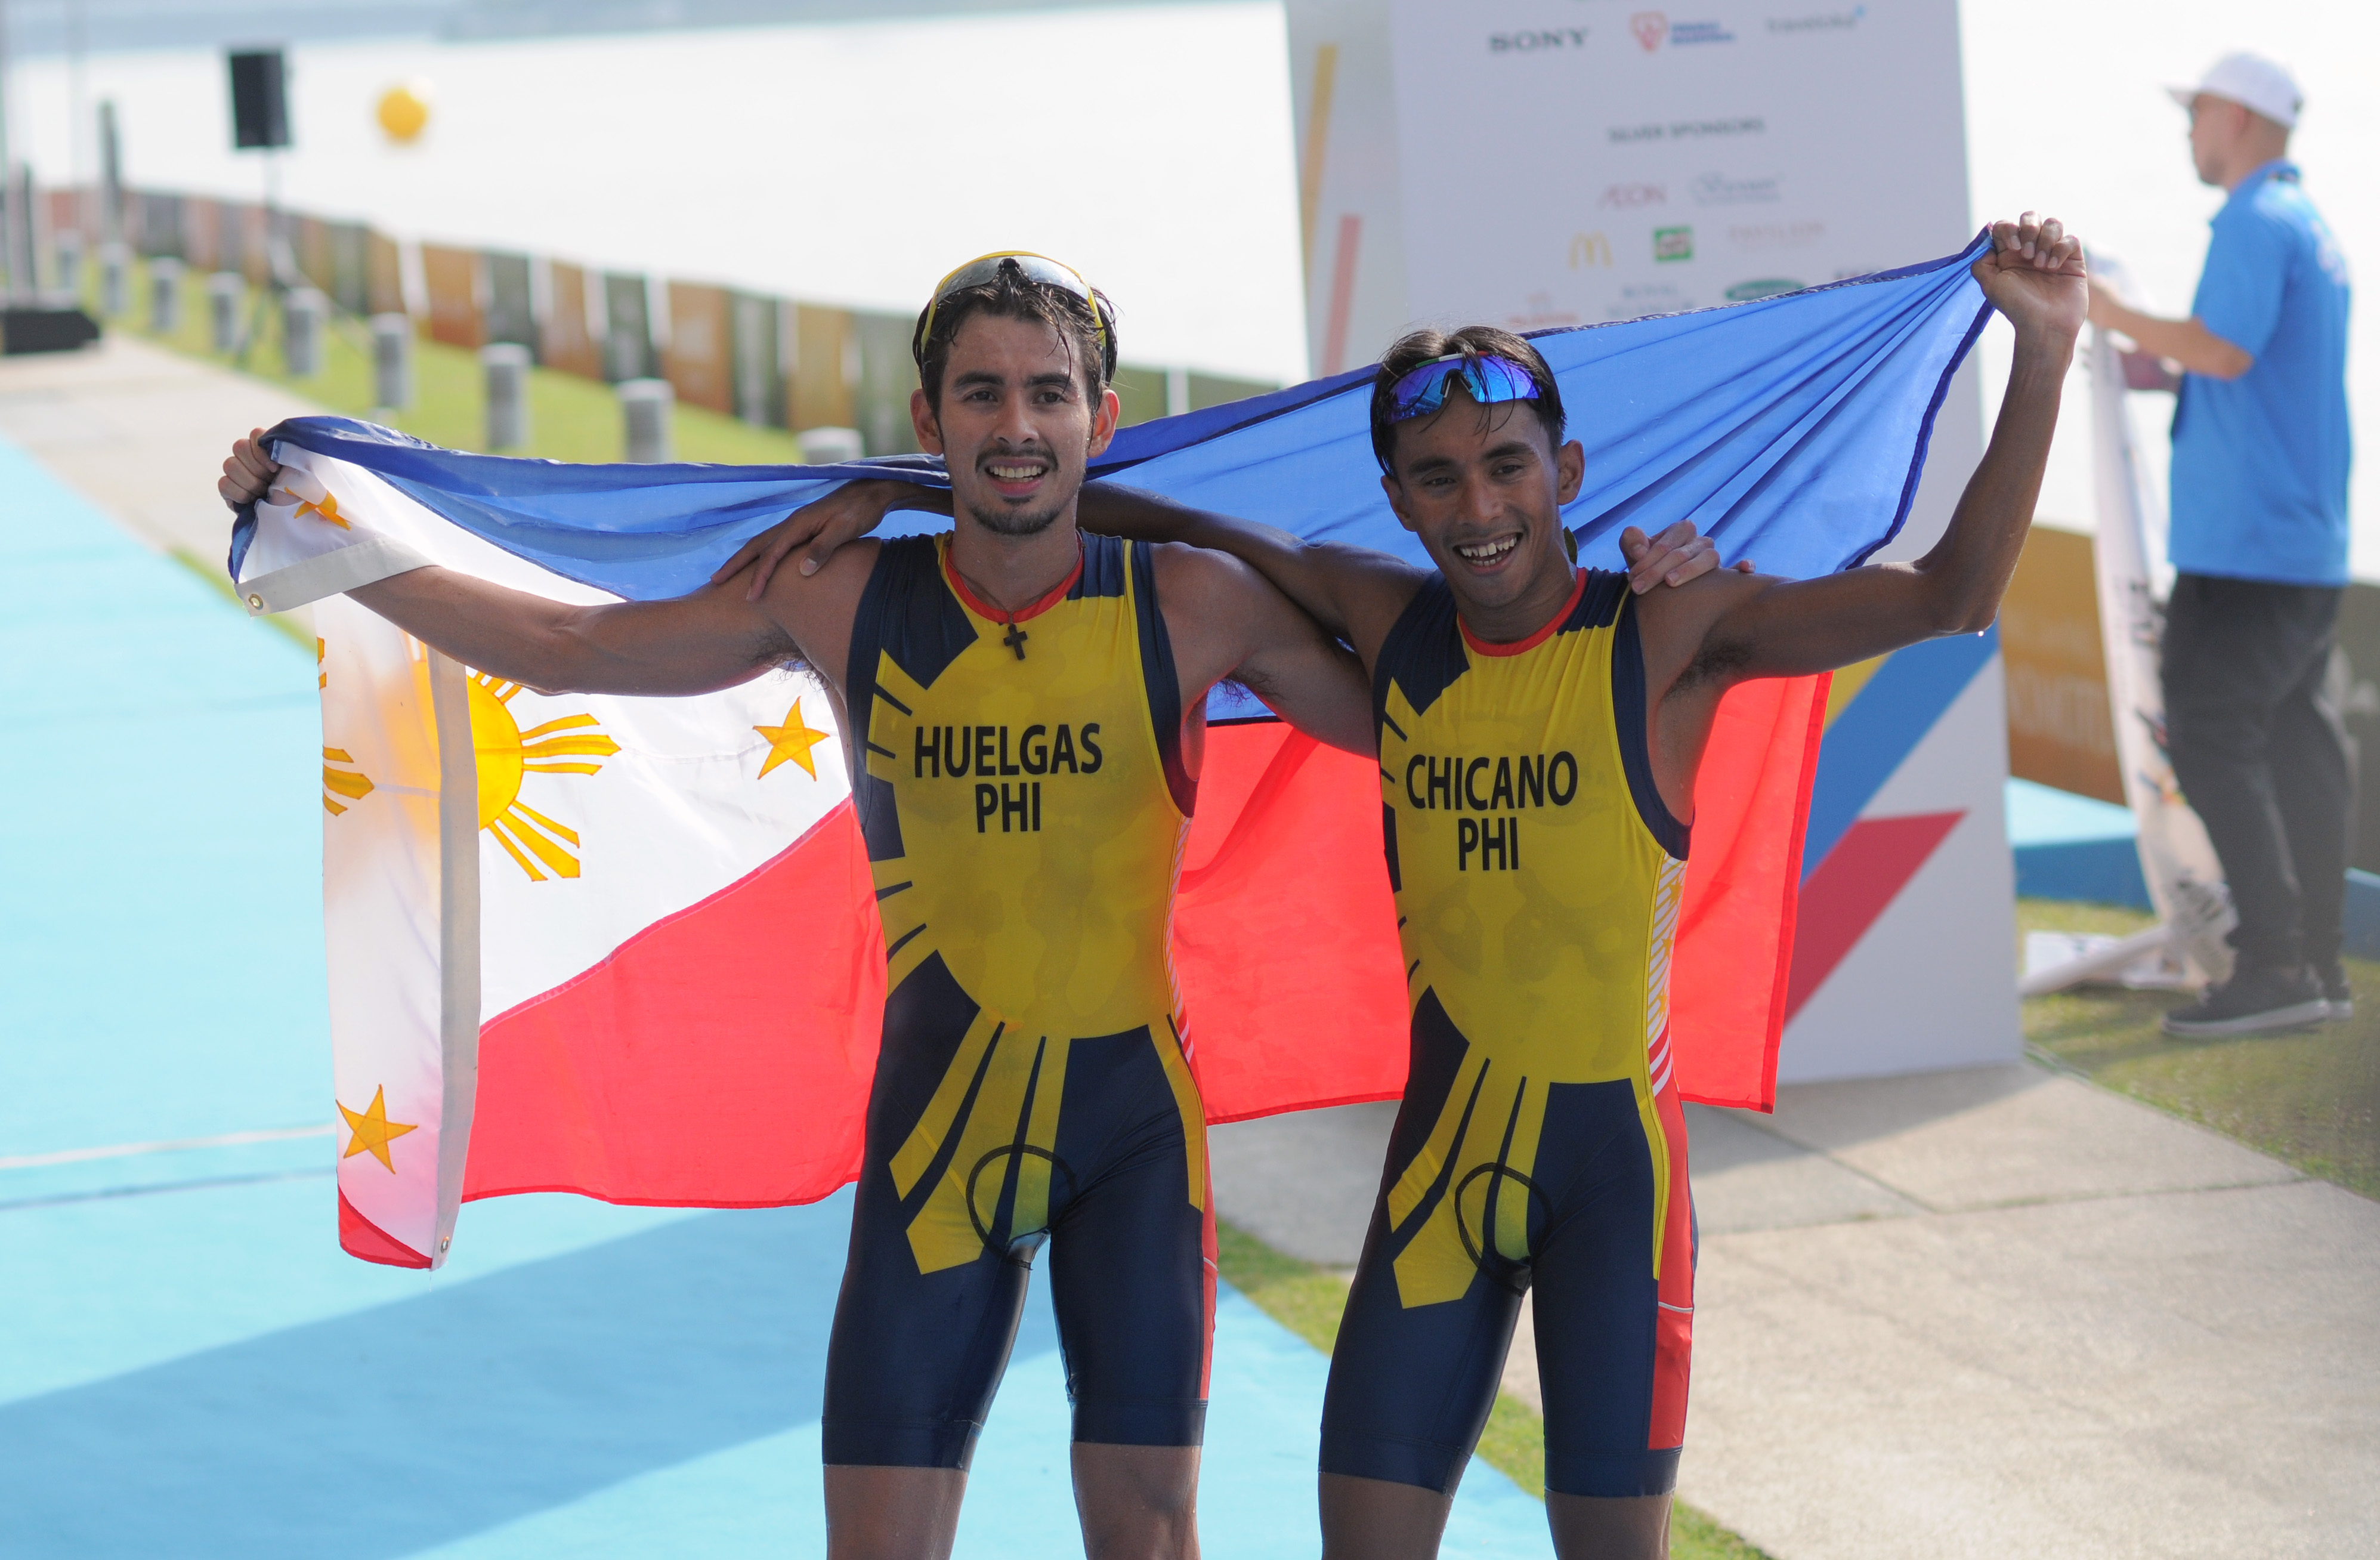 SECOND GOLD. Philippines clinches its second gold in the 2017 SEA Games courtesy of Nikko Huelgas. Photo by Adrian Portugal/Rappler 